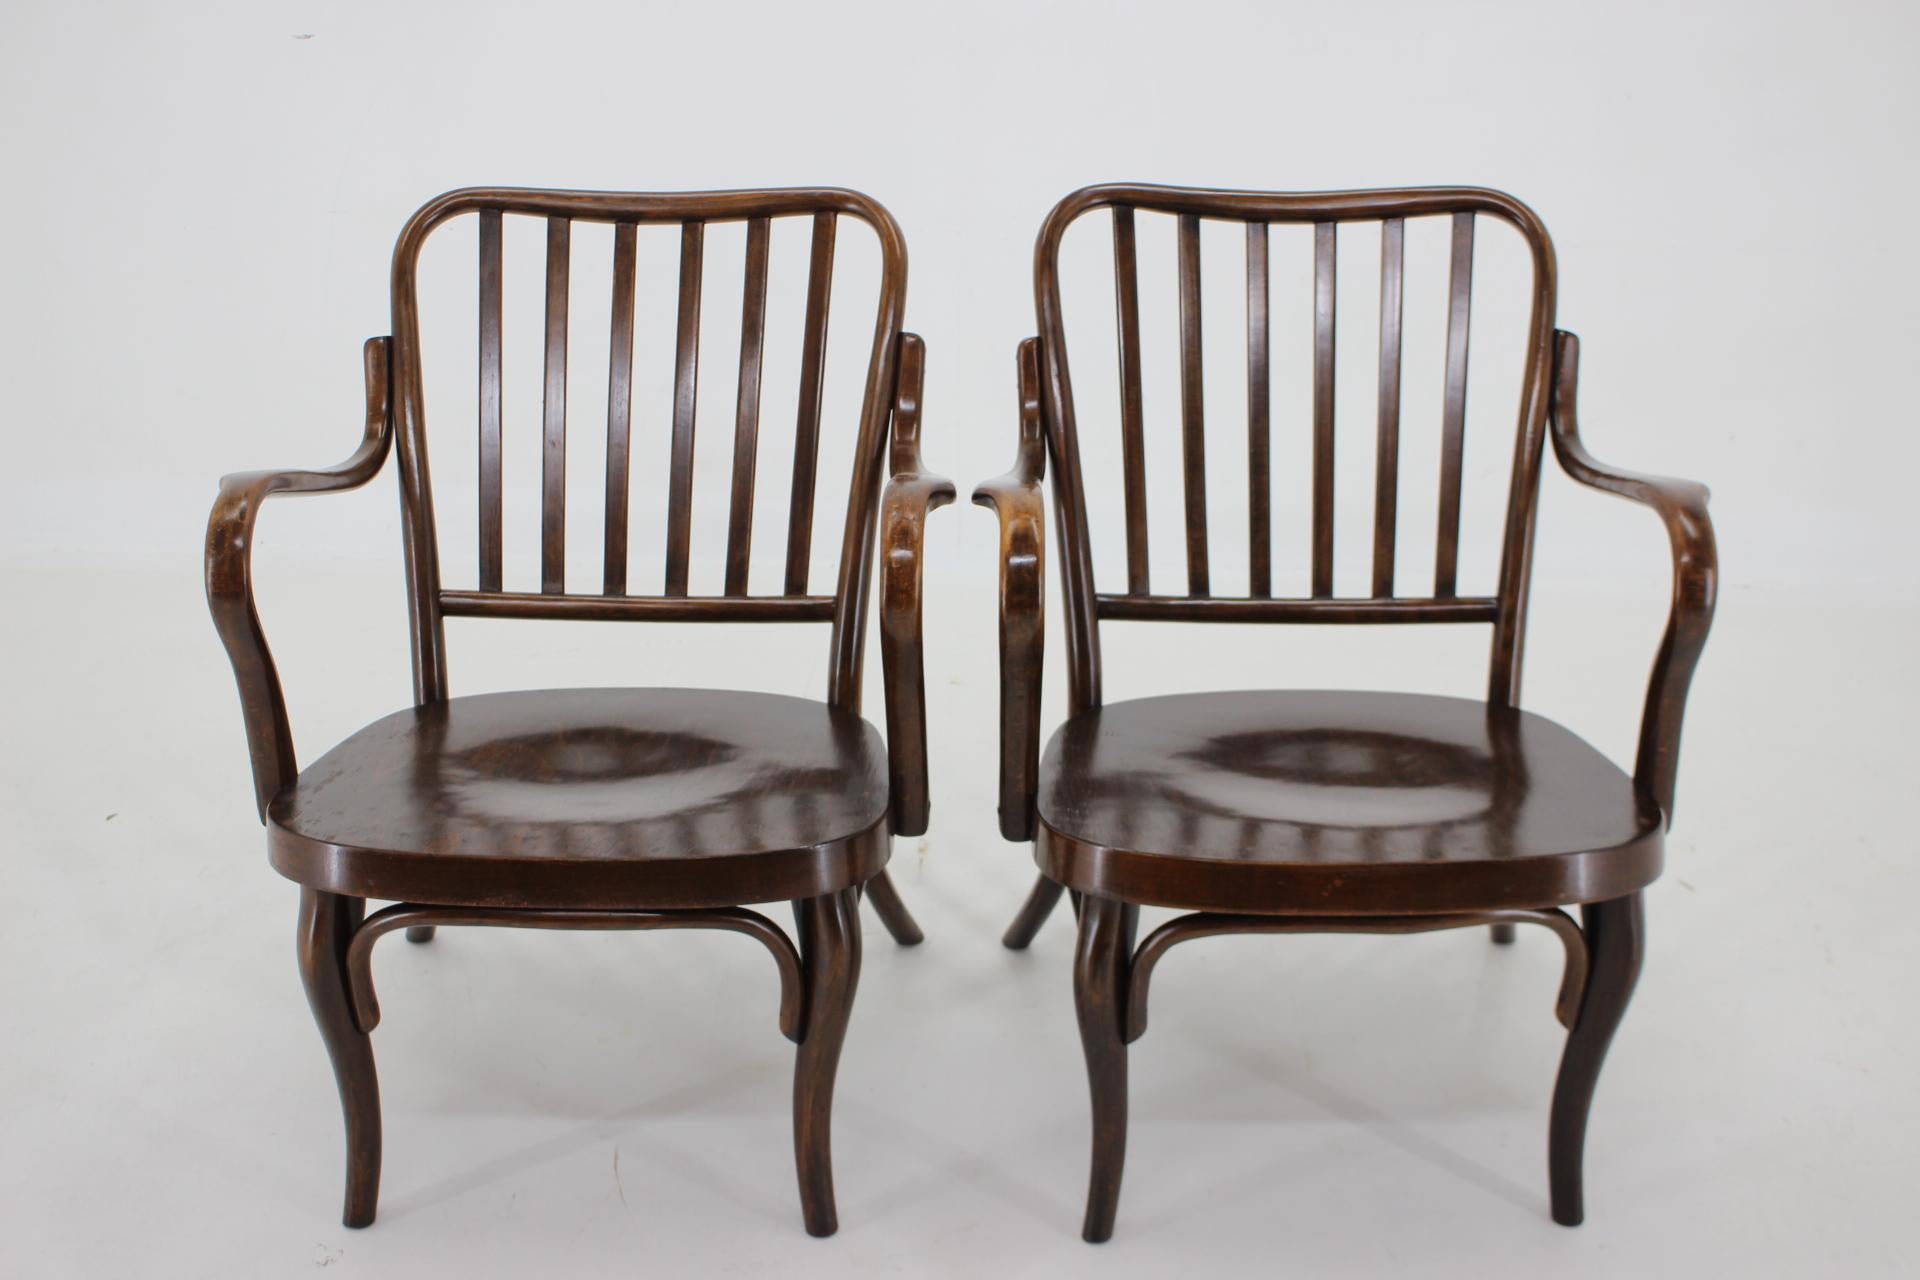 Czech 1930s Pair of Josef Frank Bentwood Armchairs no. 752 by Thonet